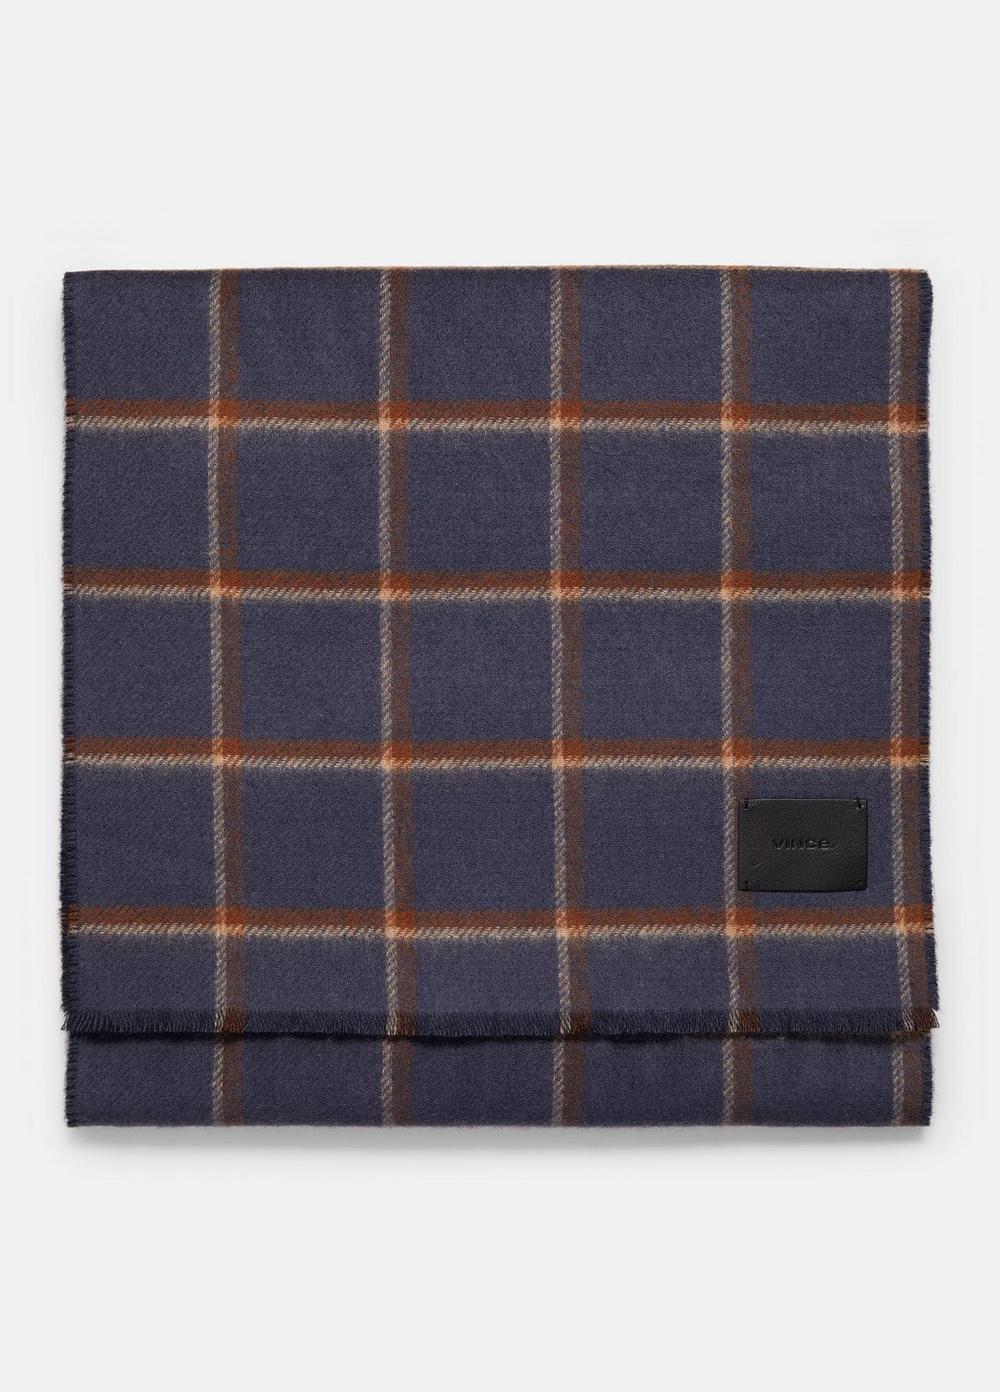 Windowpane Wool And Cashmere Double-Face Scarf, Night Storm Vince